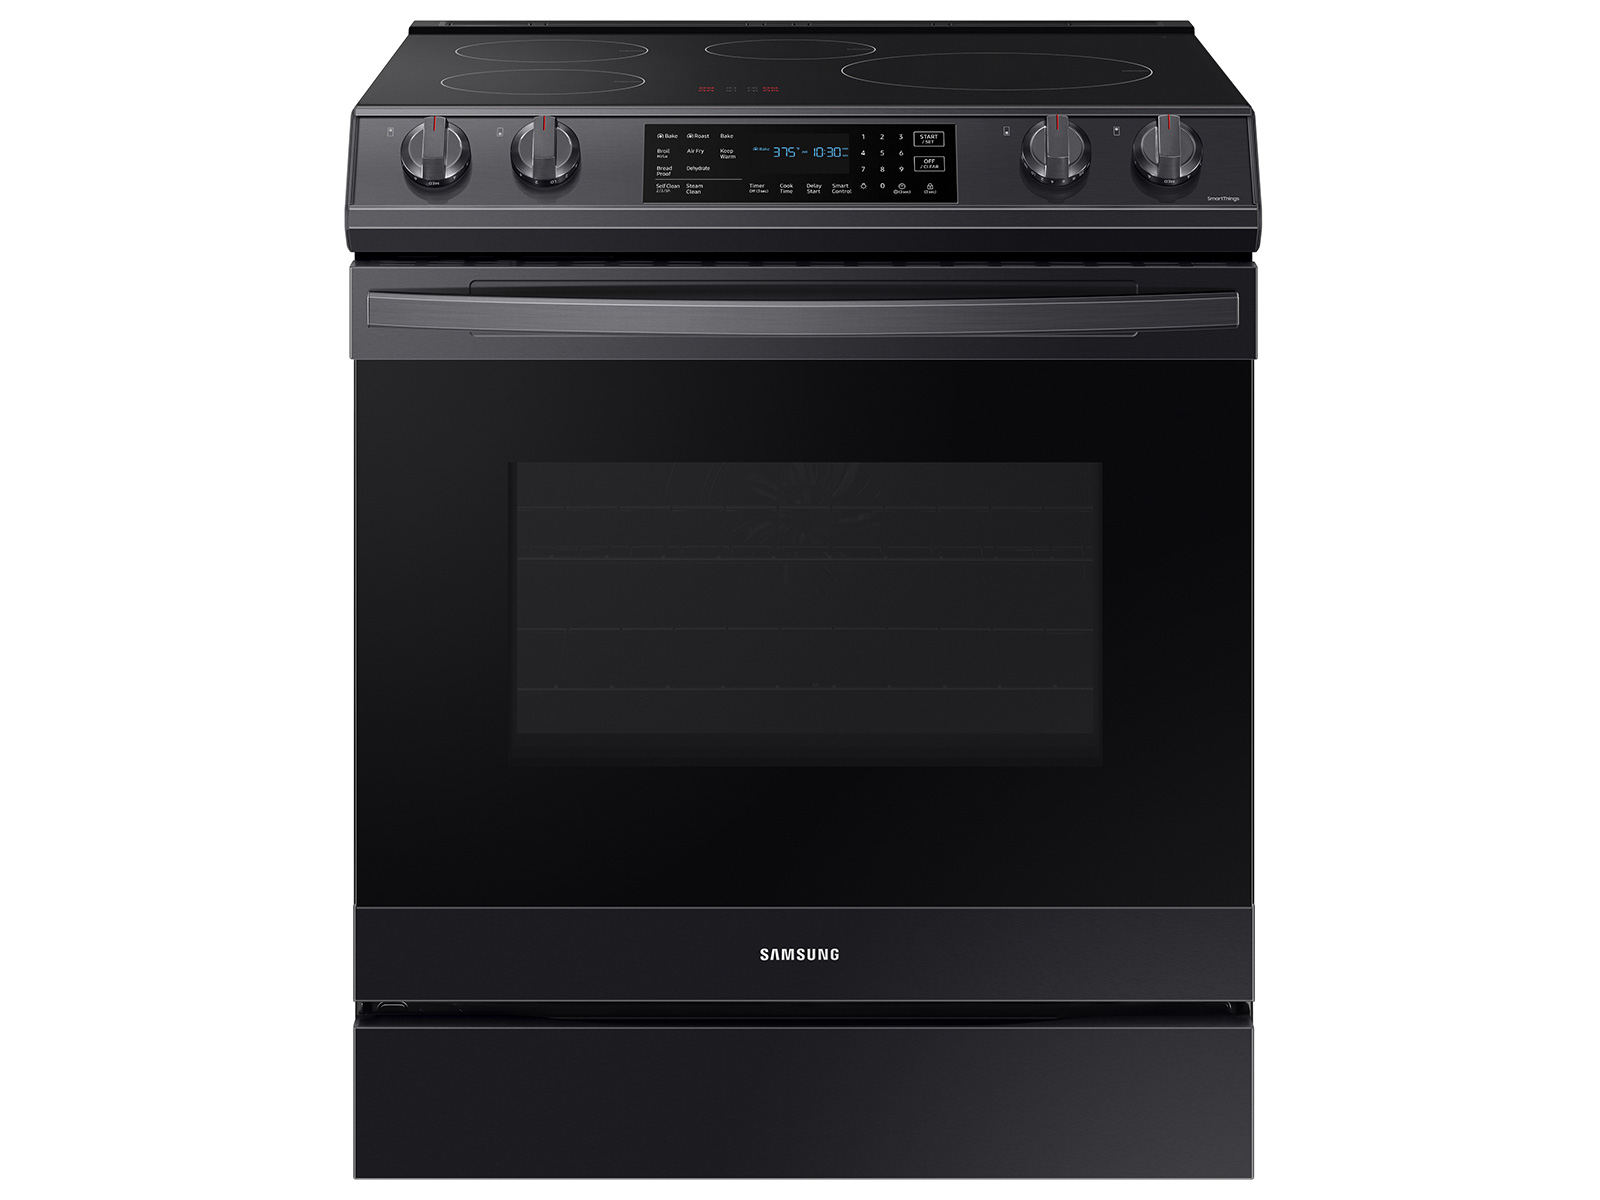 Thumbnail image of 6.3 cu. ft. Smart Rapid Heat Induction Slide-in Range with Air Fry & Convection+ in Black Stainless Steel